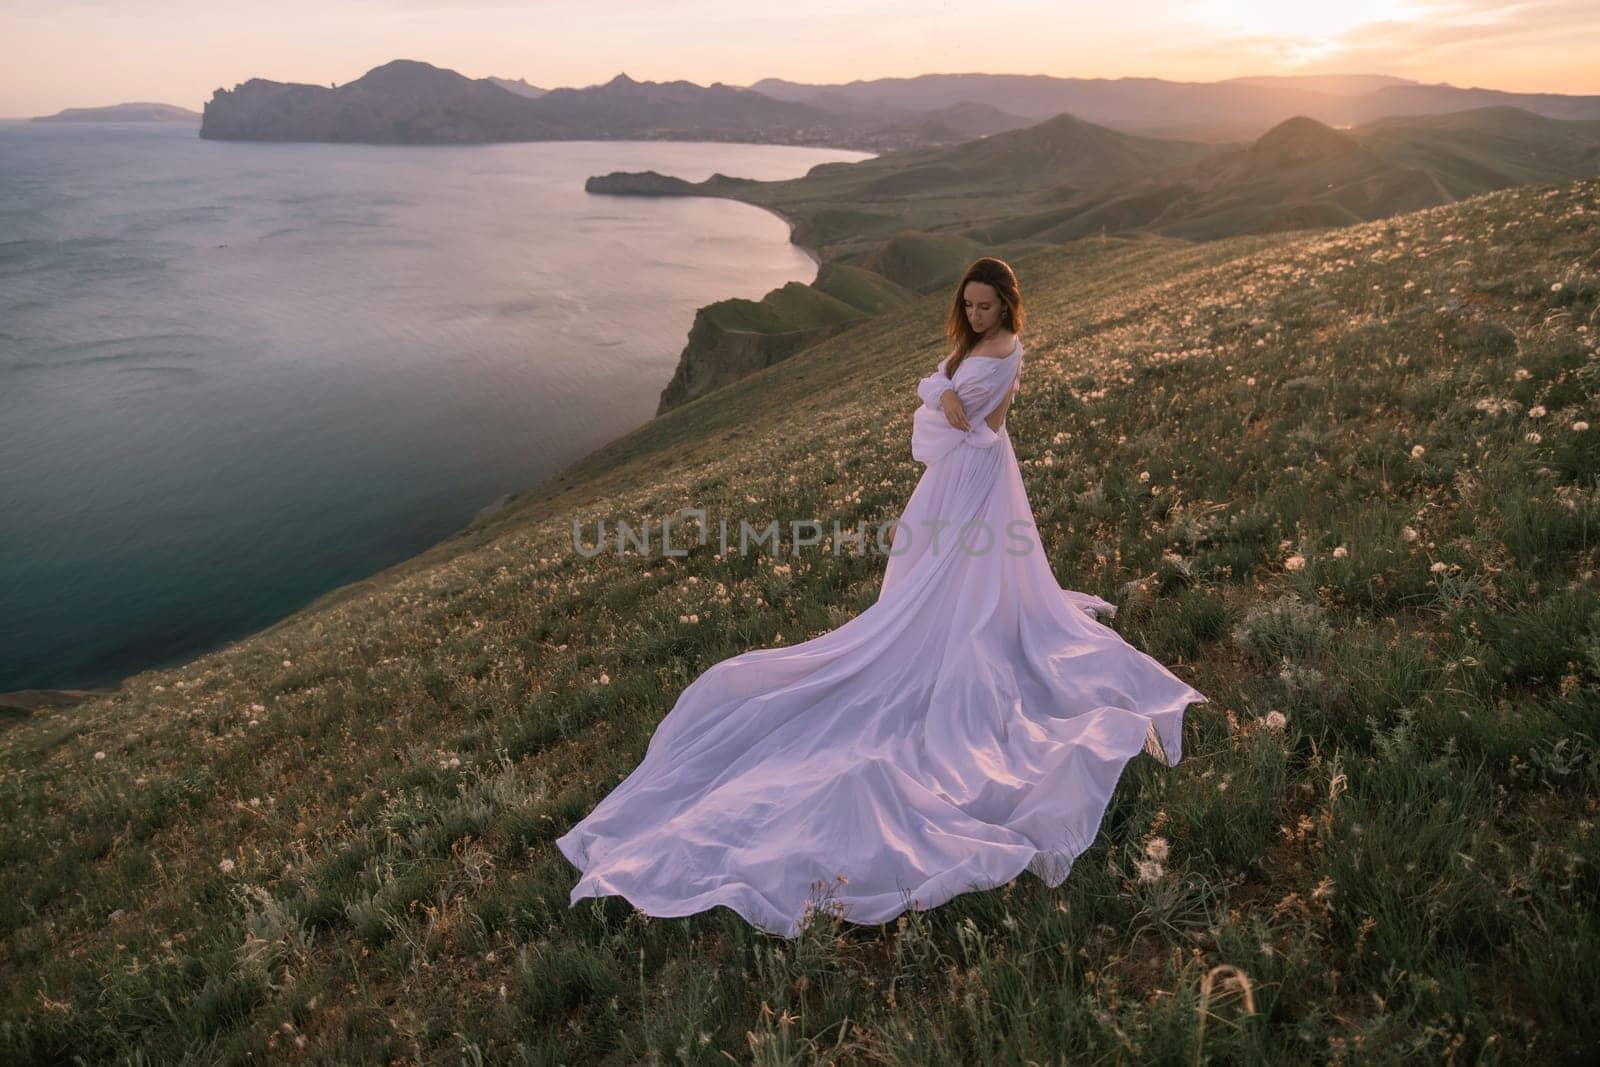 A woman in a long white dress stands on a hill overlooking a body of water by Matiunina